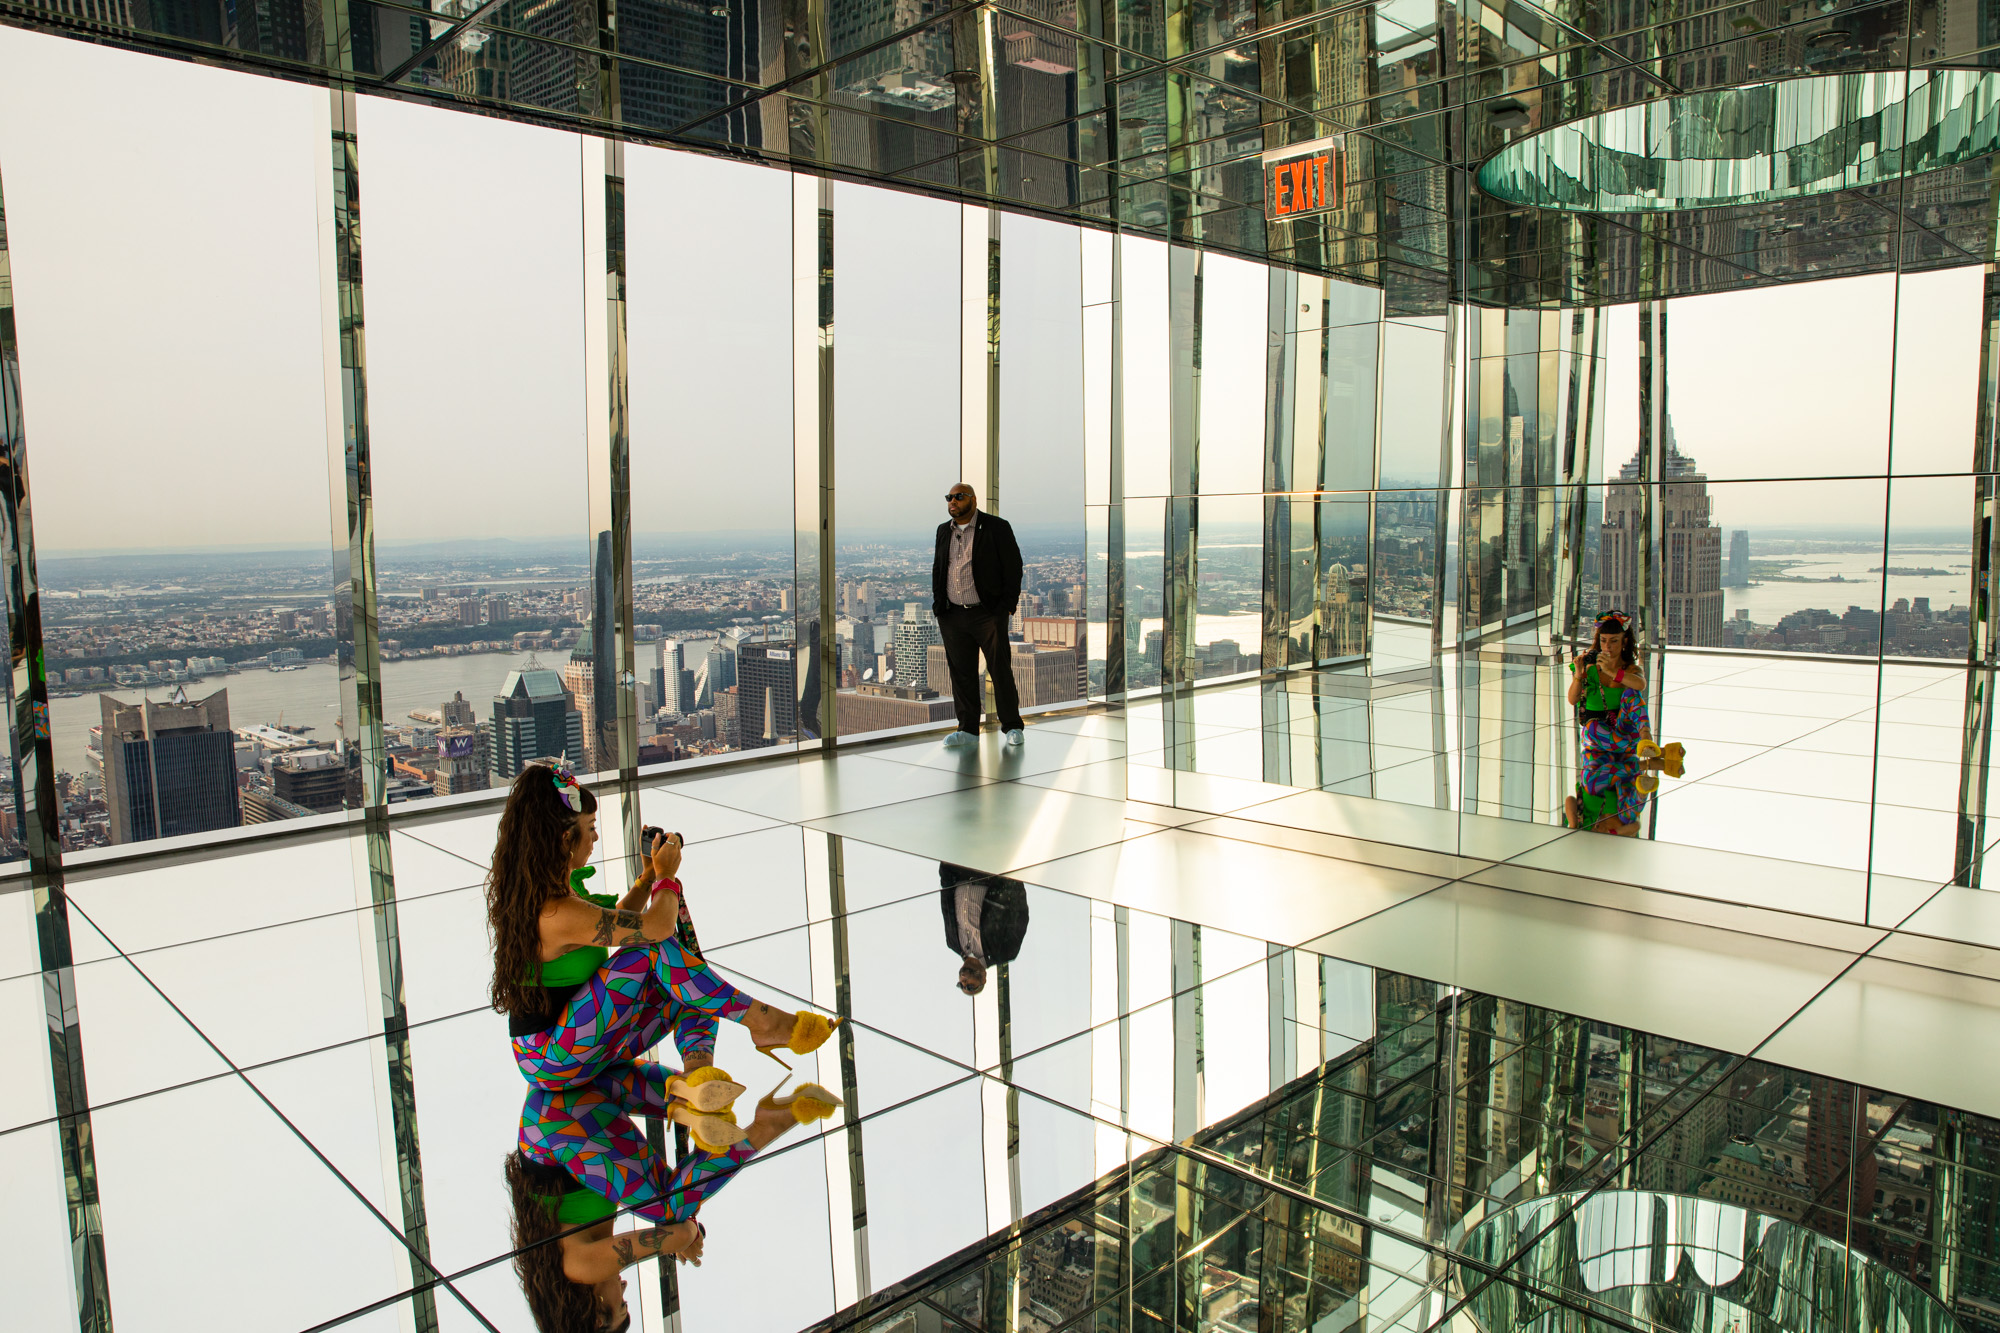 SUMMIT One Vanderbilt - Creating an unparalleled immersive observatory  experience 1,000 feet above ground in New York City - Arup